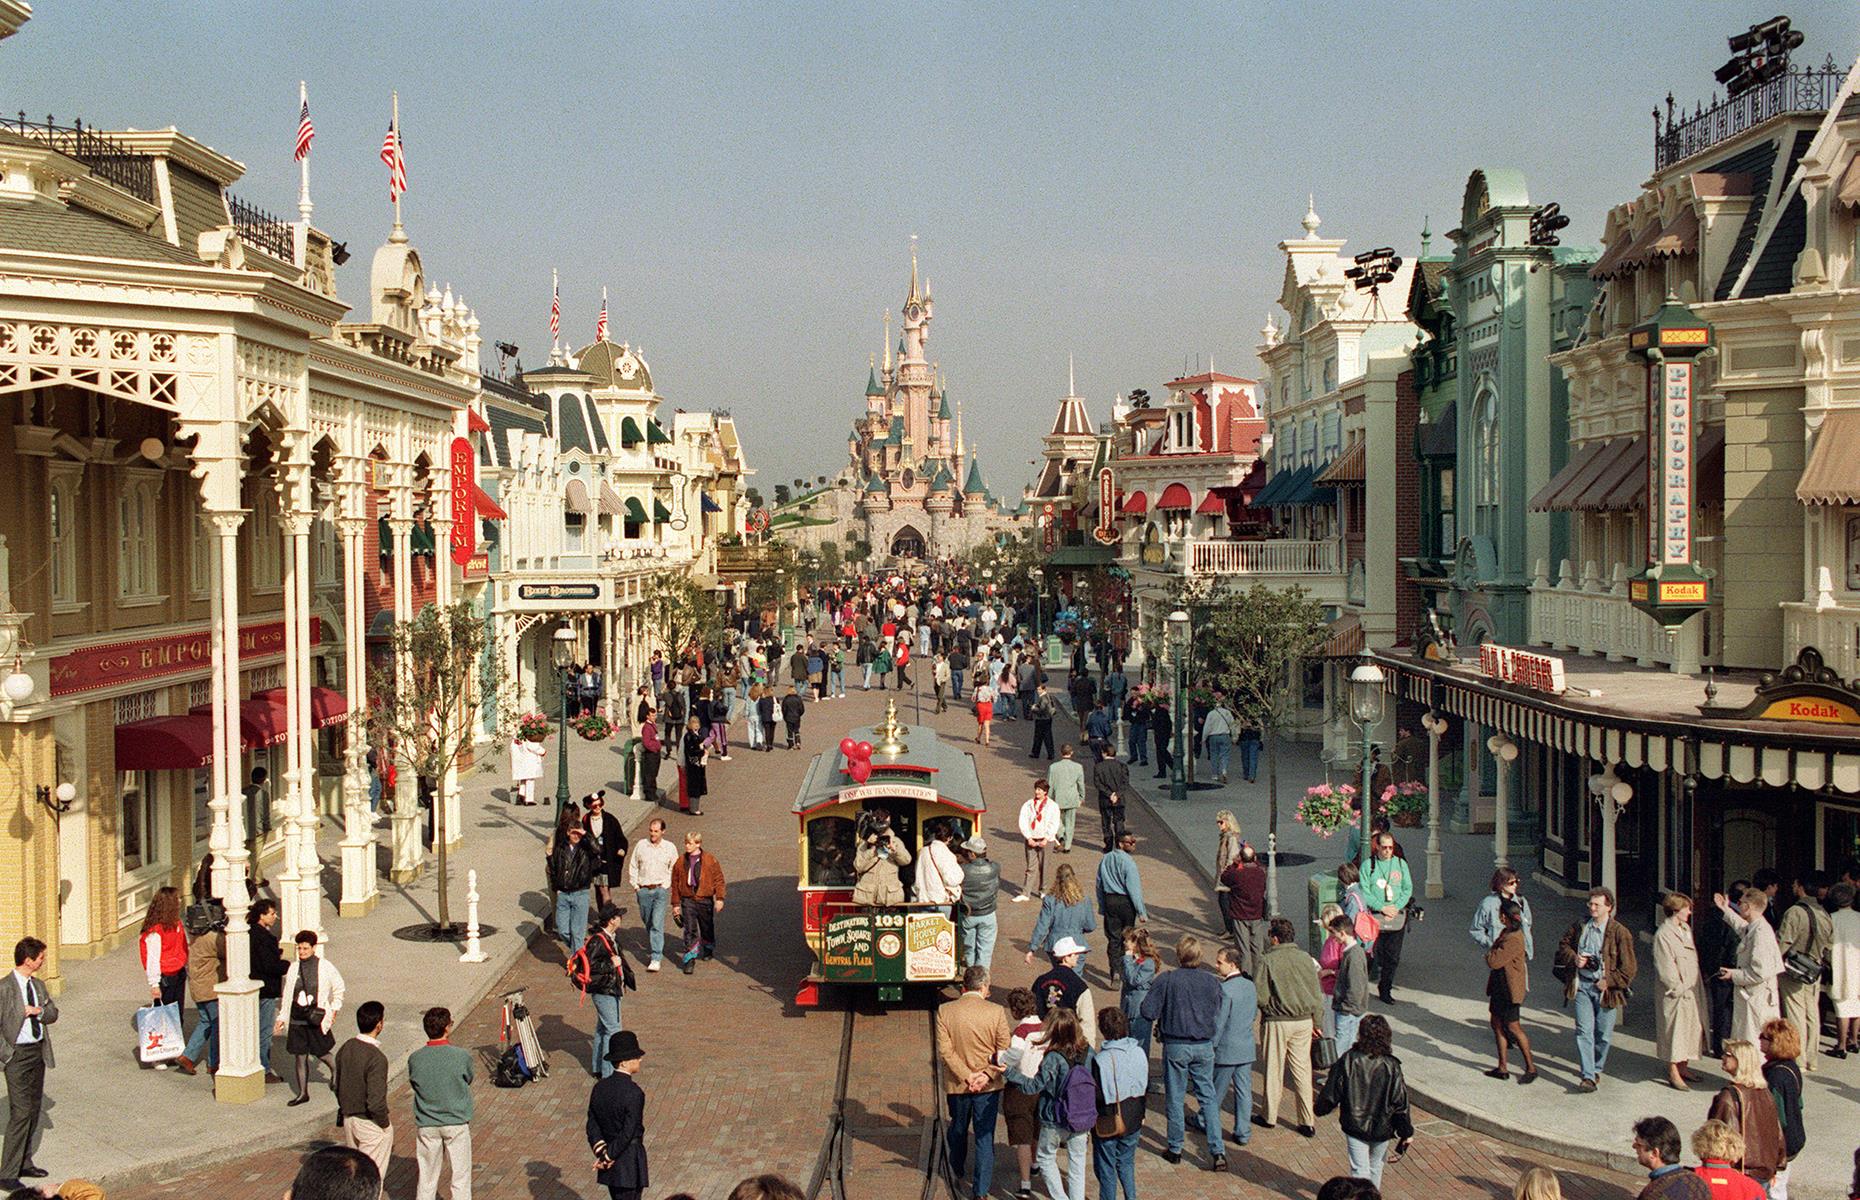 Located just east of the French capital, Disneyland Paris (then Euro Disney) opened to visitors on 12 April 1992. The first theme park here was Disneyland Park, which featured many familiar attractions and lands, including Fantasyland, Frontierland, Adventureland and Main Street, U.S.A. Captured in this photo are those lucky enough to enjoy a press preview, which took place on the eve of the park's opening day, on 11 April.